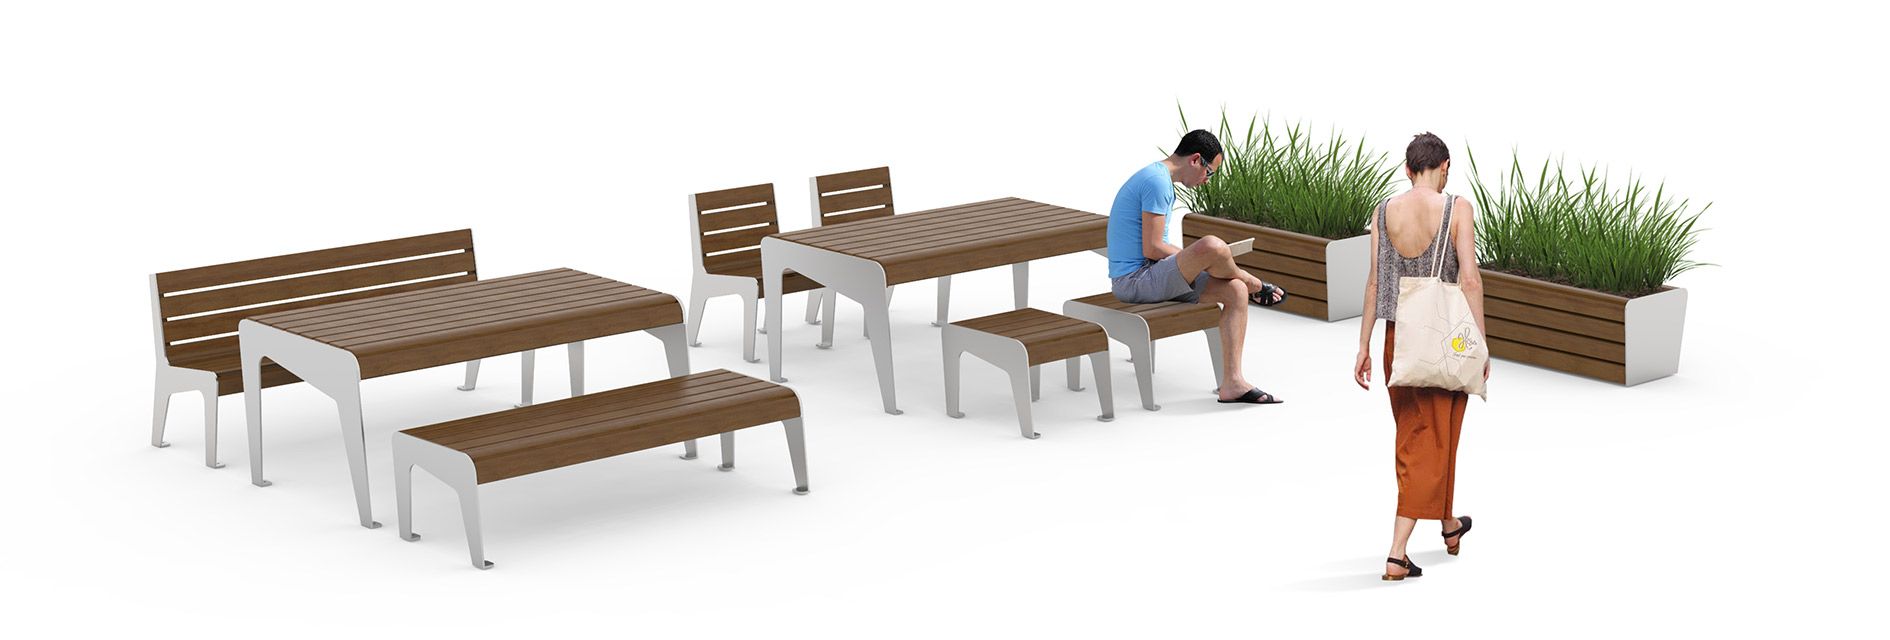 Urban furniture: benches, tables, seats, planters